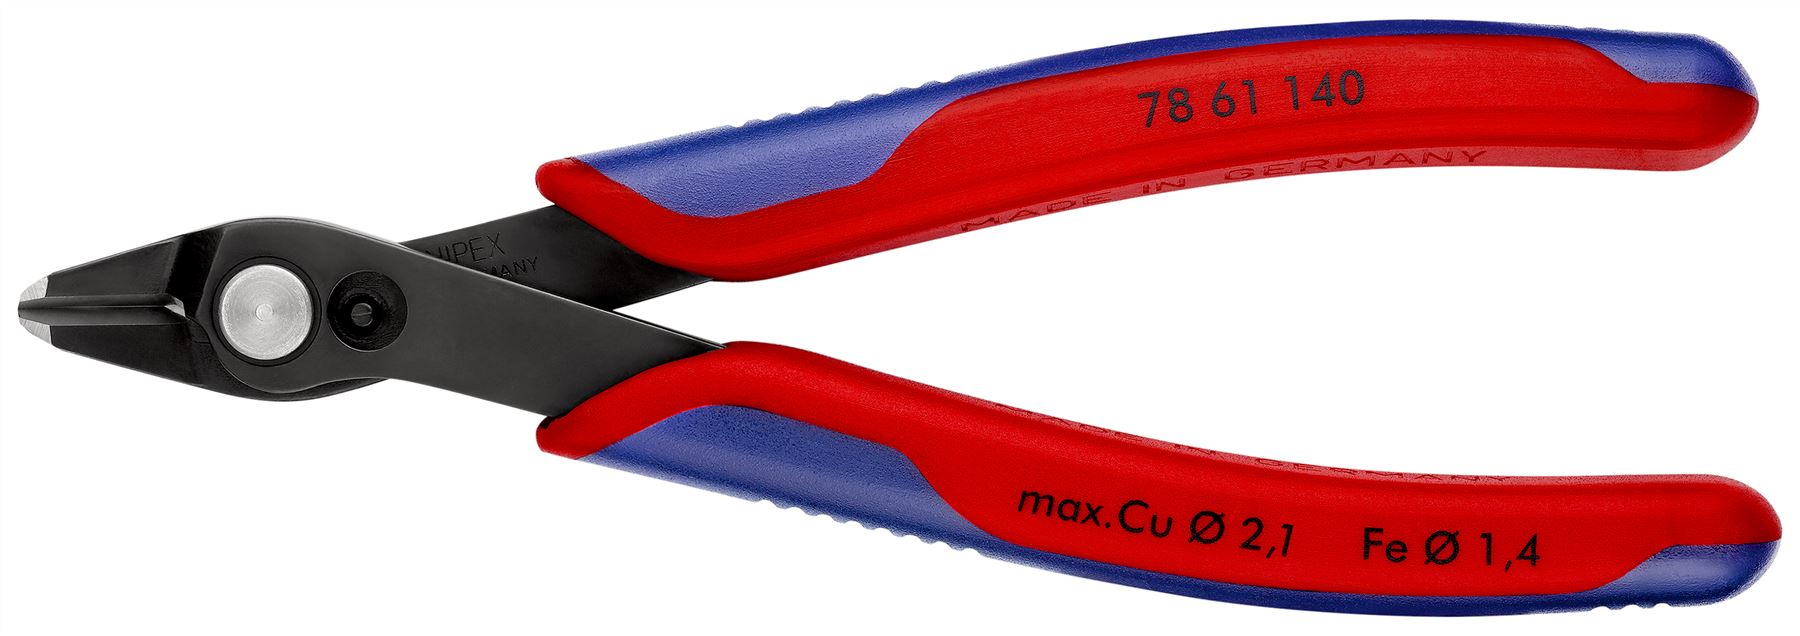 Knipex Electronic Super Knips® XL 140mm Fine Wire Cutting Pliers 78 61 140